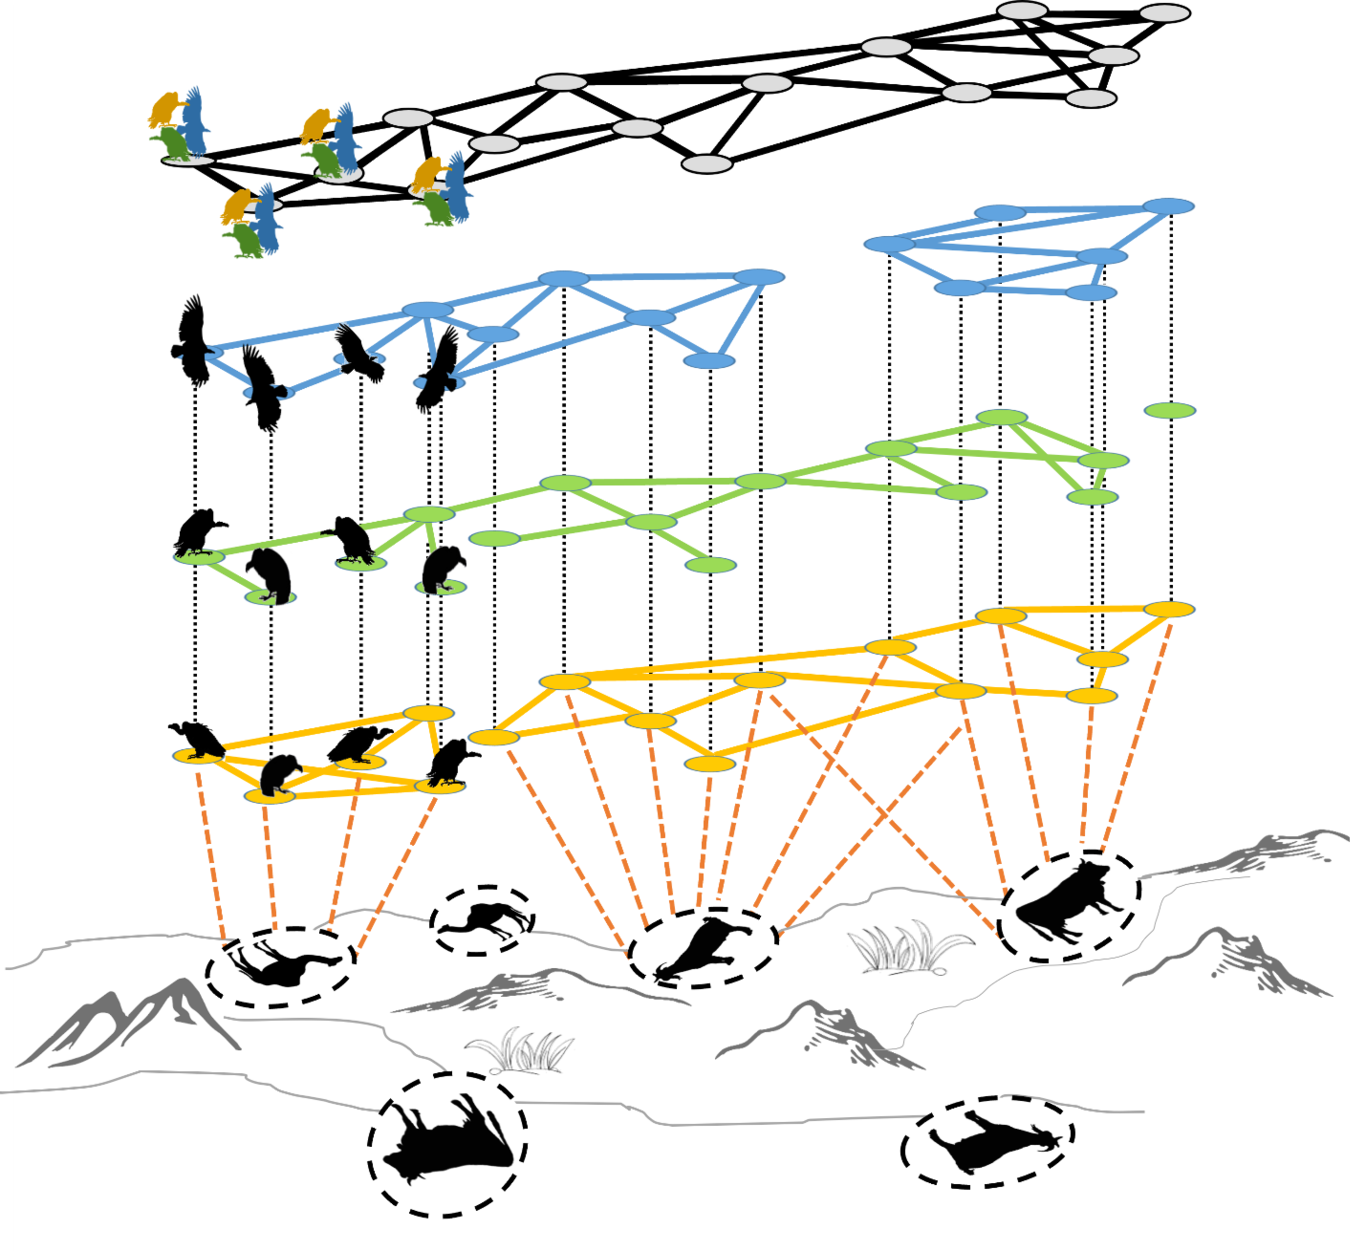 From : Social networks across multiple situations. A hypothetical example of social interactions among vultures in different social situations: co-flying in blue, nocturnal ground interactions, (i.e., co-roosting) in green, and diurnal ground interactions (e.g., co-feeding) in yellow. Solid lines within each social situation indicate interactions within the social situation and black-dotted lines between social situations connect occurrences of the same individual. Dashed orange lines connect individuals to food sites to show how spatial proximity can be used to infer social interactions, for example when co-feeding. An aggregate network at the top, in gray, combines all interactions from the different social situations.